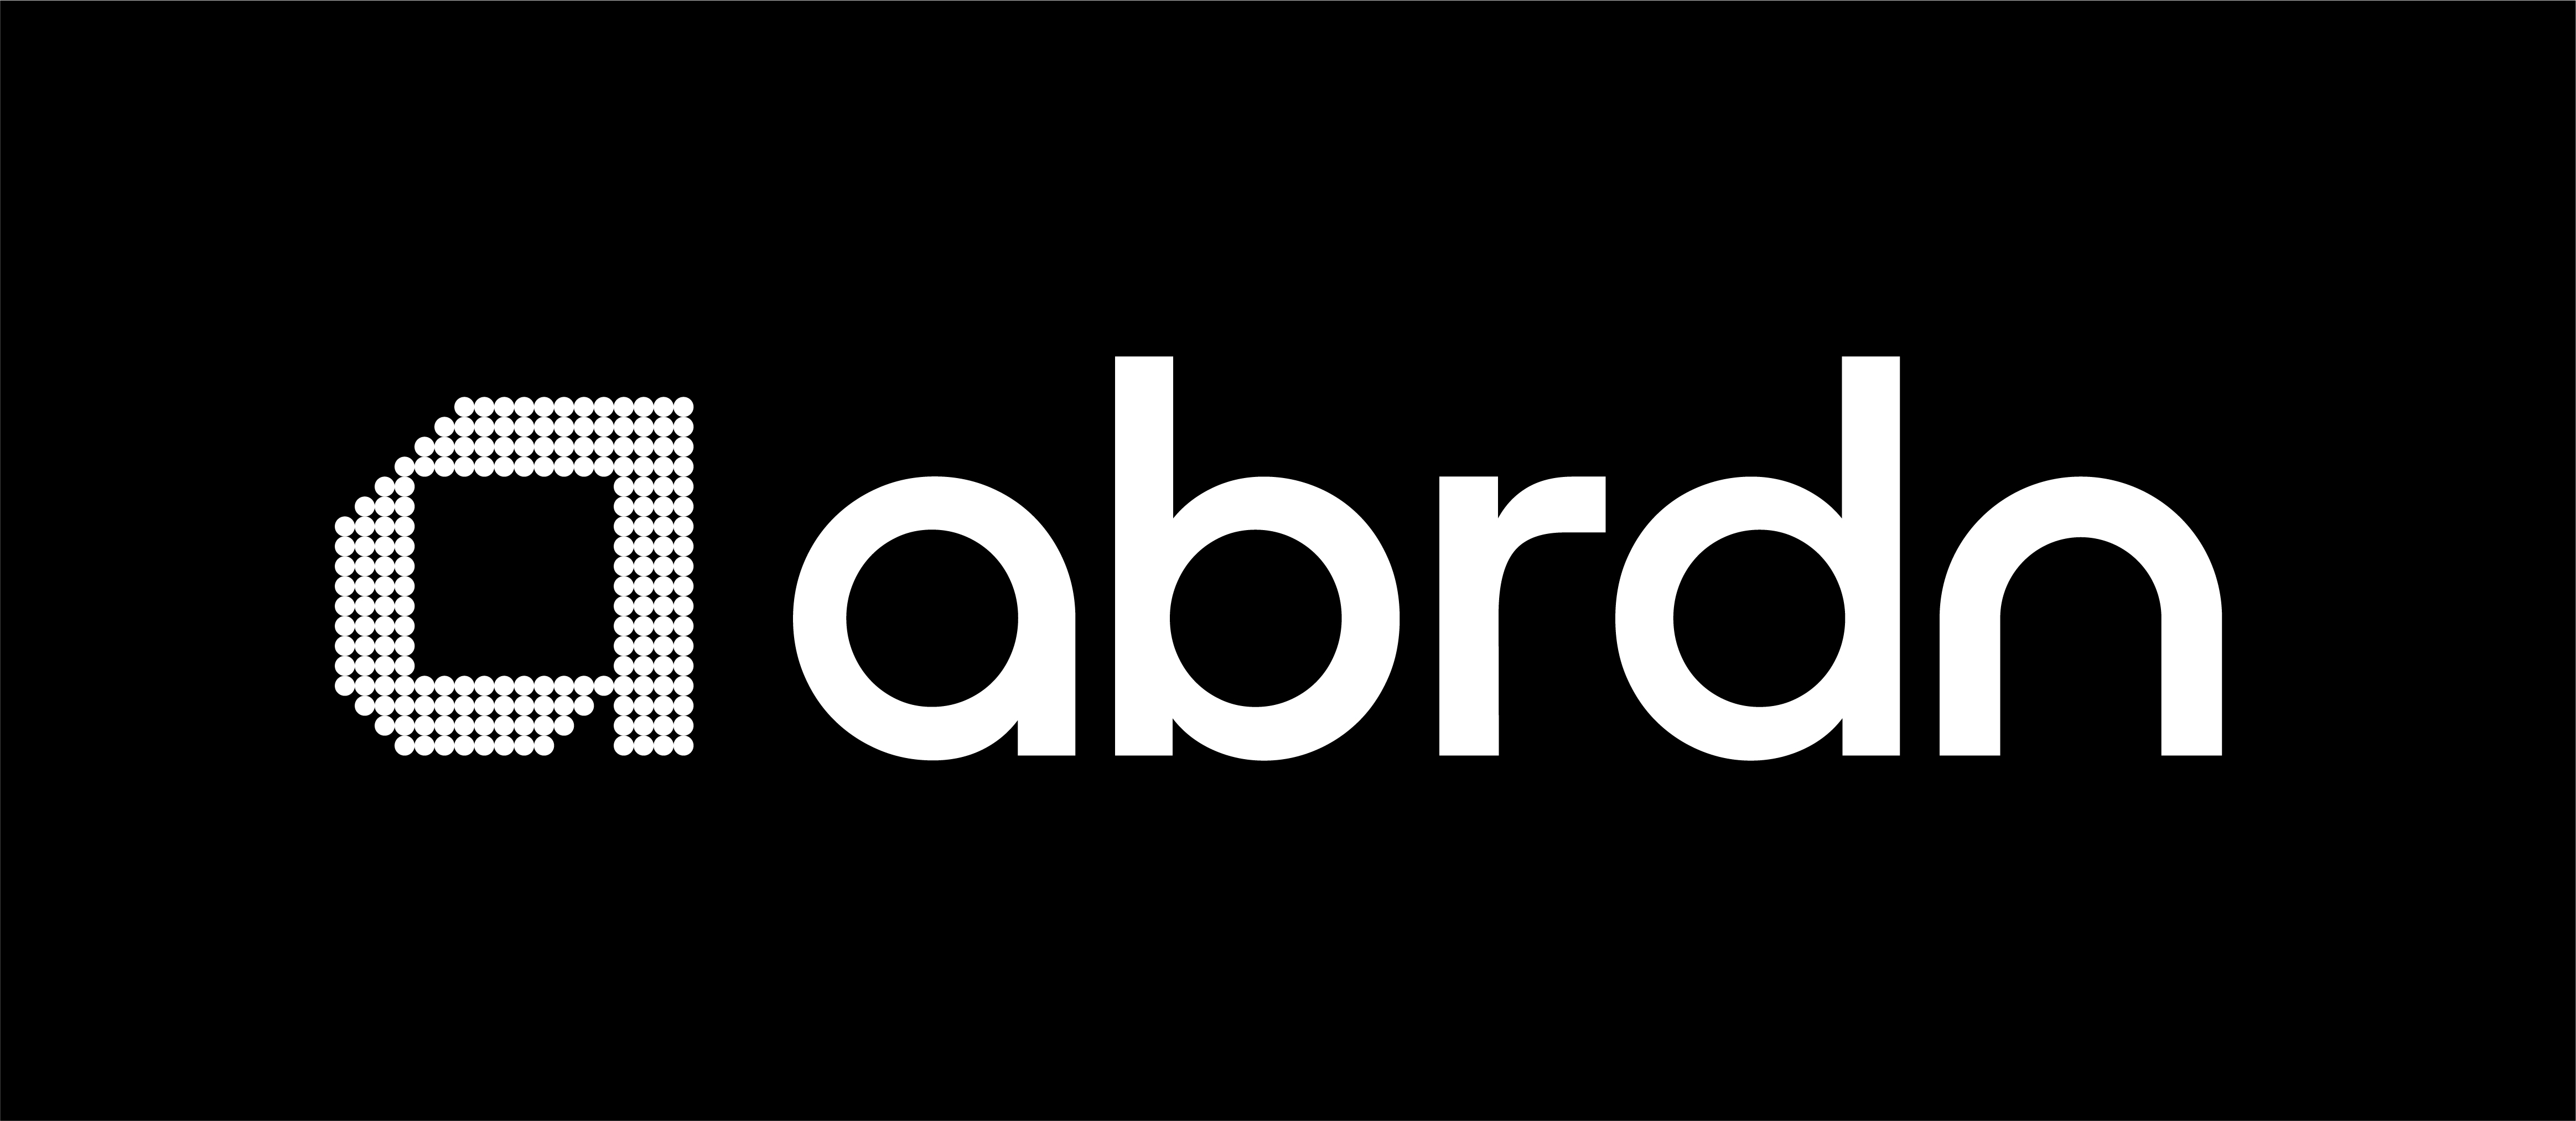 Aberdeen Corporate Services Limited